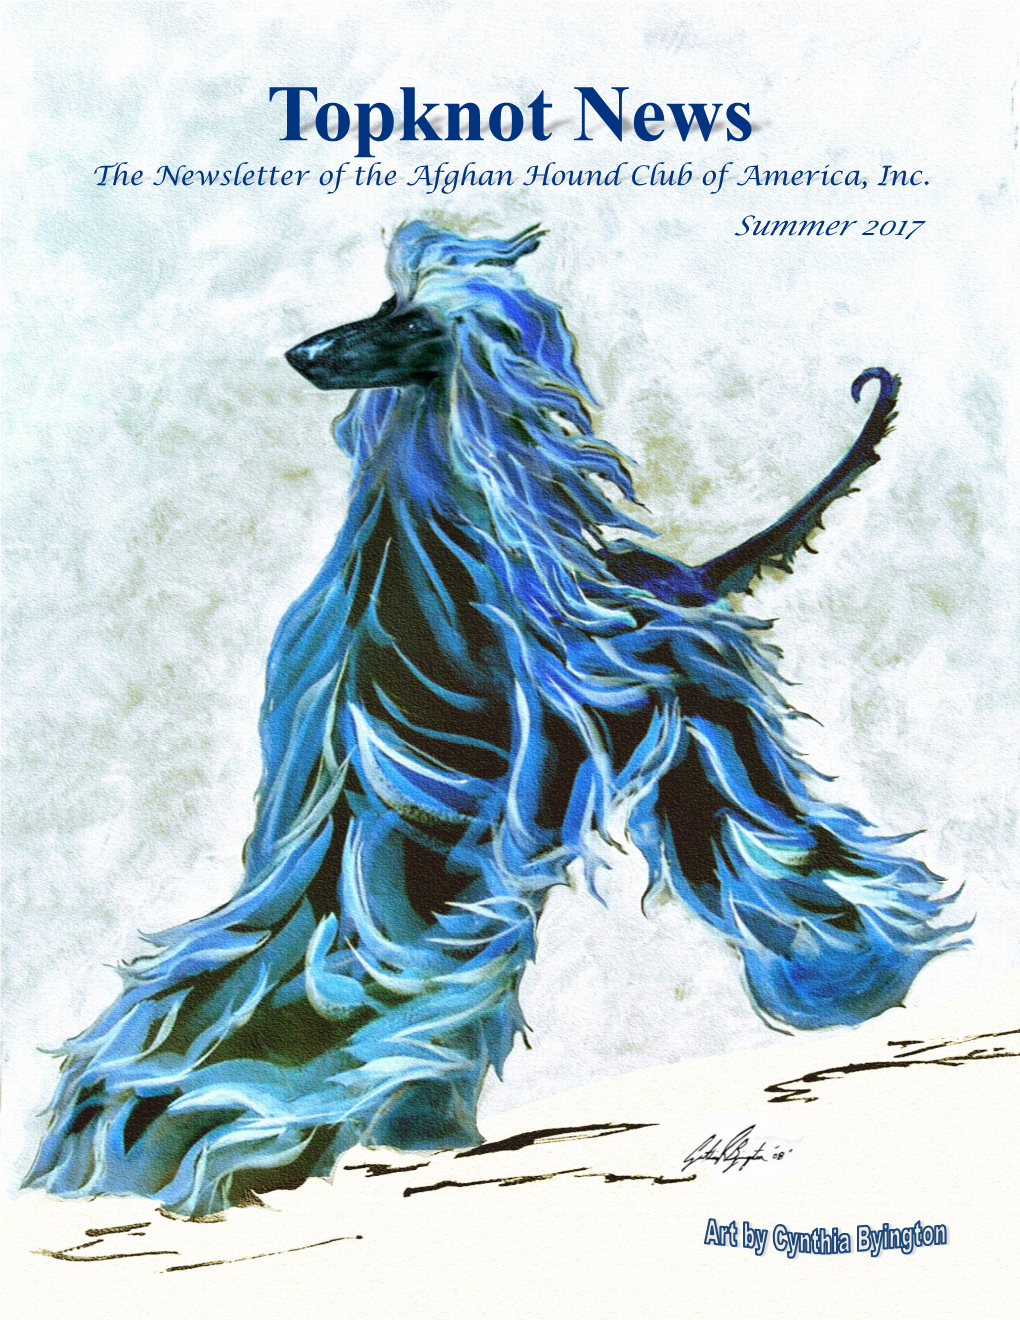 Topknot News the Newsletter of the Afghan Hound Club of America, Inc